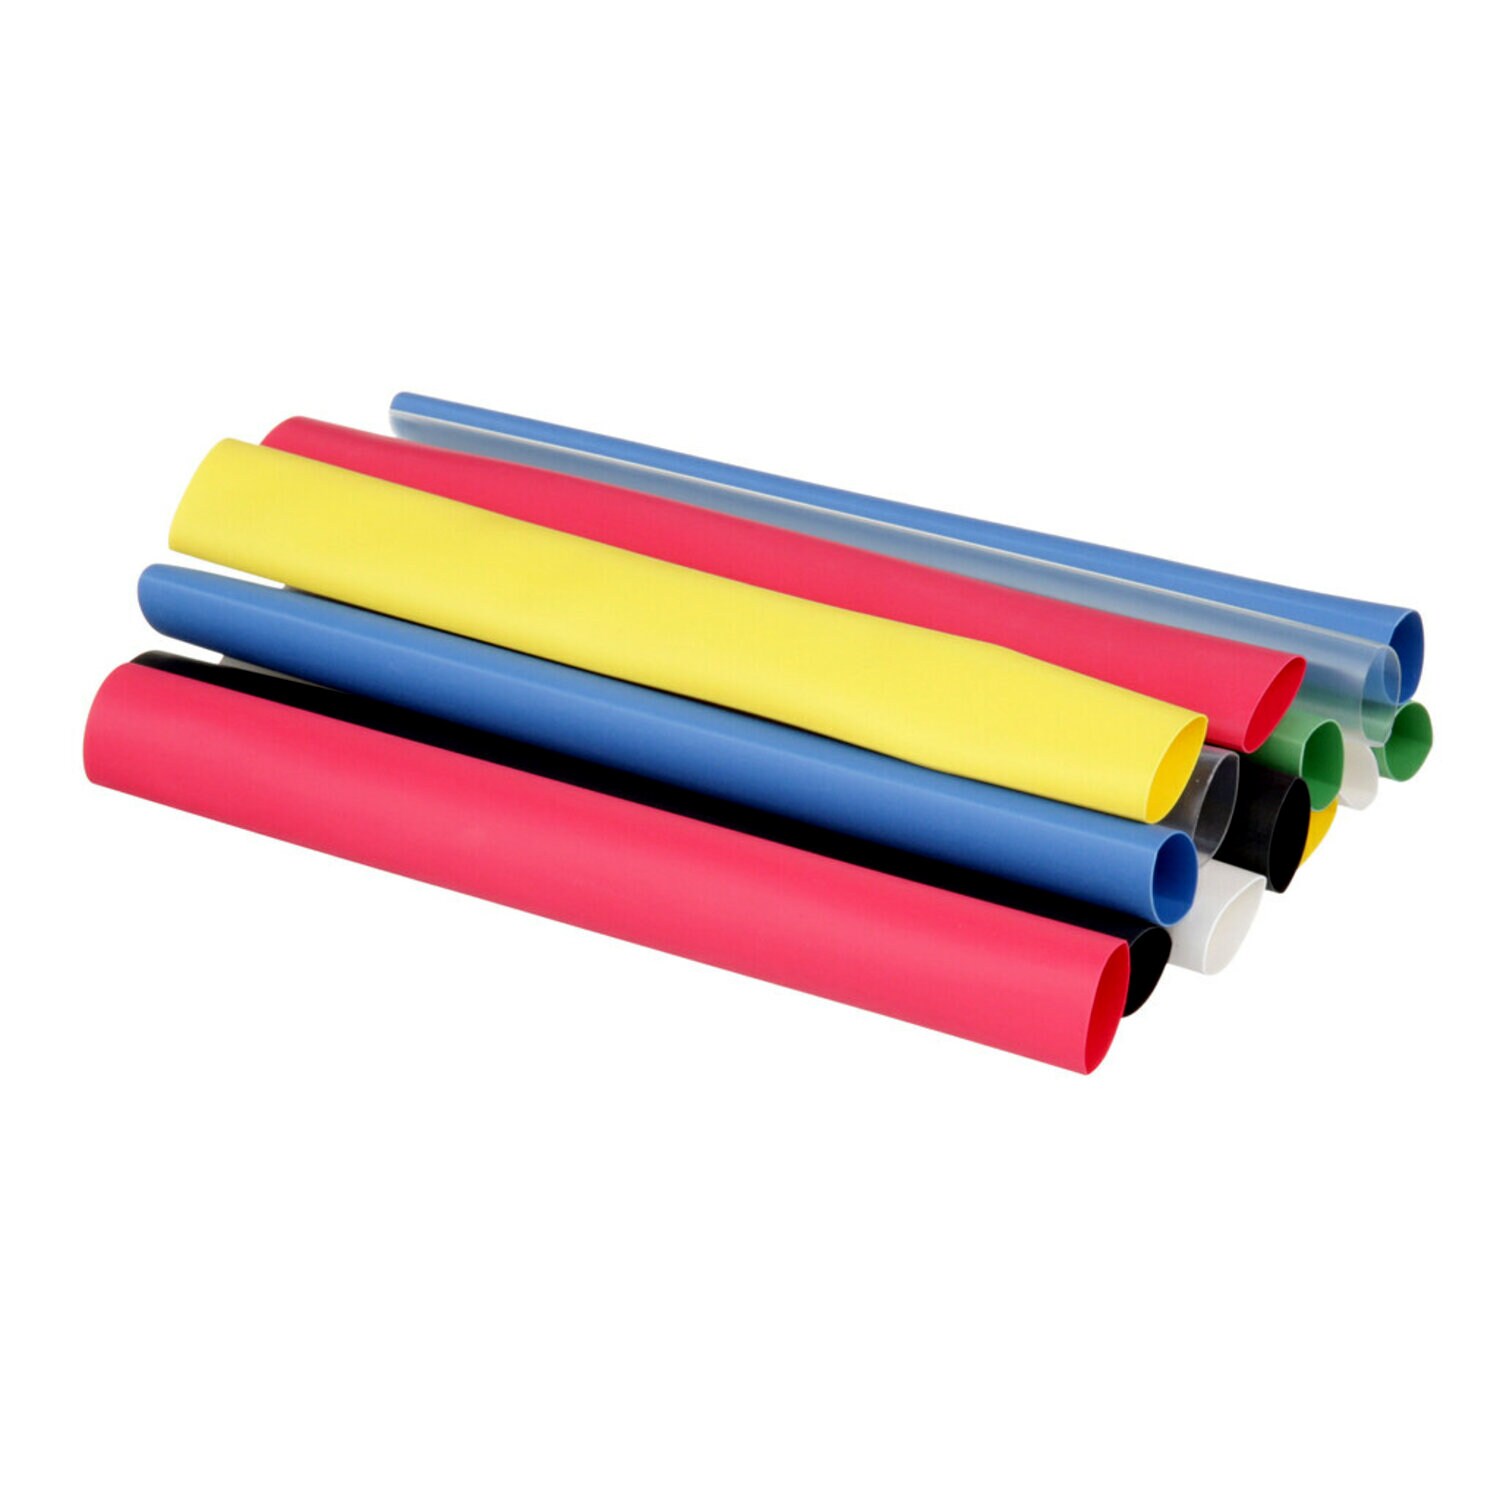 7000132602 - 3M Heat Shrink Tubing Assortment Pack FP-301-3/8-Assort: 6 in length
pieces, 2 each of 7 colors, 10/case